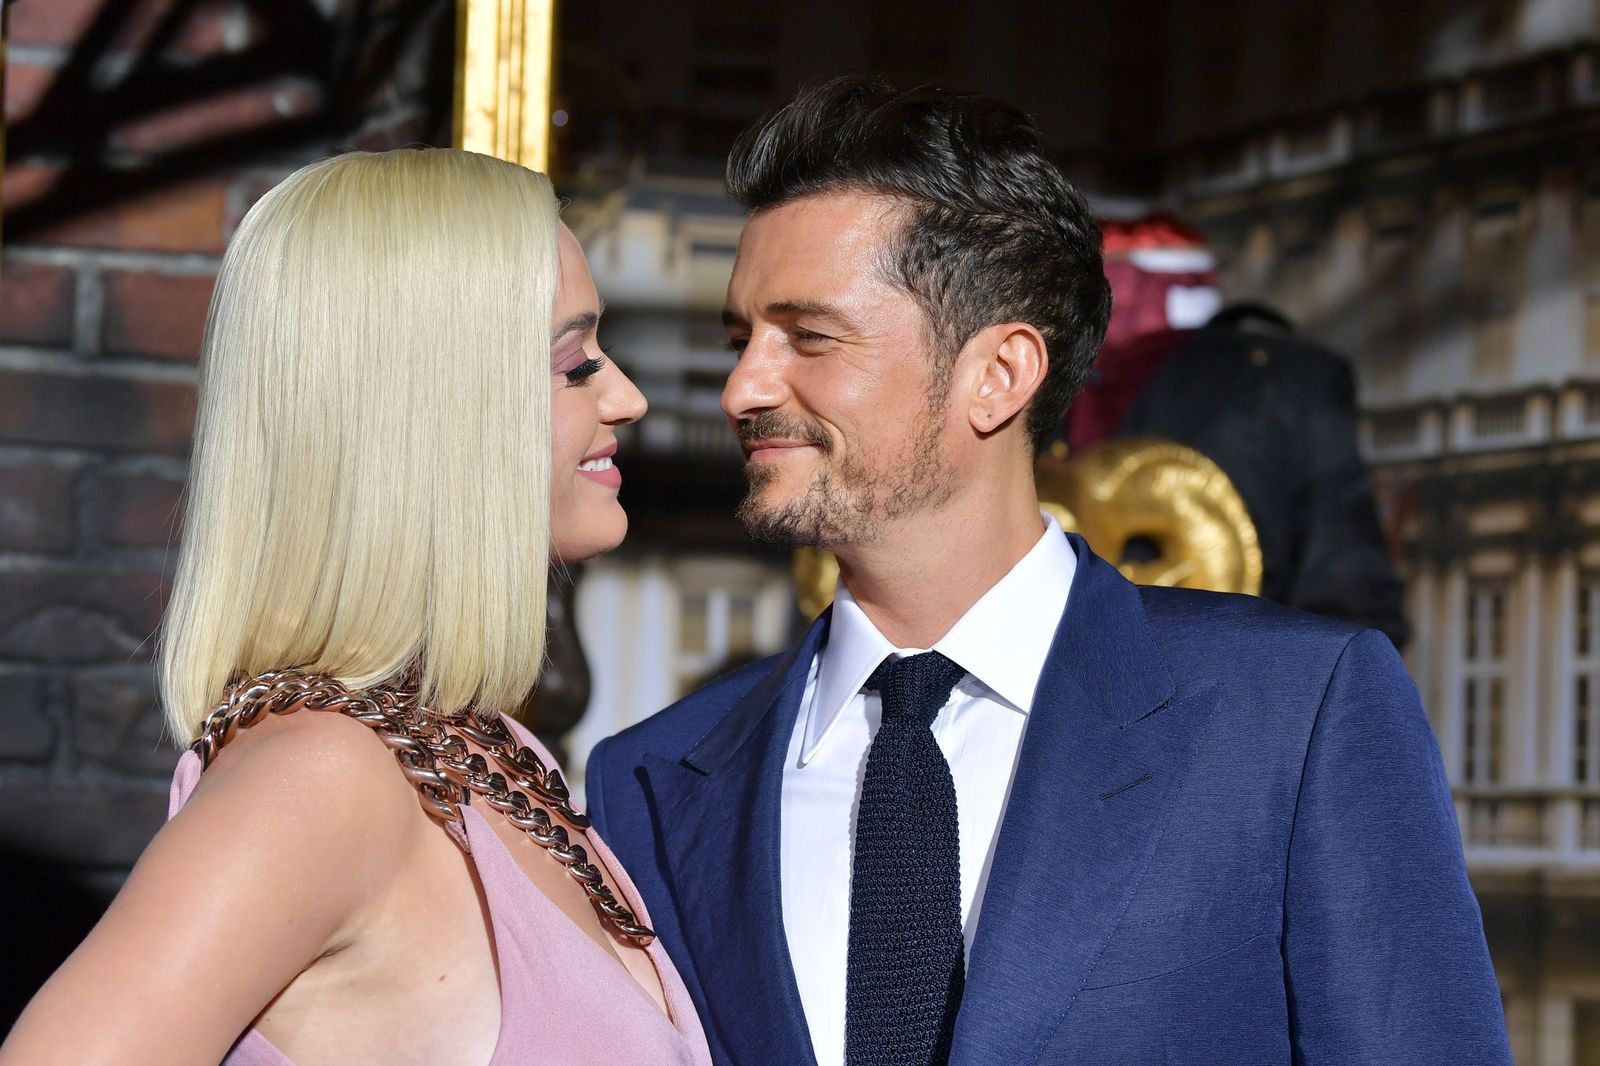 Katy Perry and Orlando Bloom at the LA Premiere Of Amazon's "Carnival Row" at TCL Chinese Theatre on August 21, 2019 | Photo: Getty Images